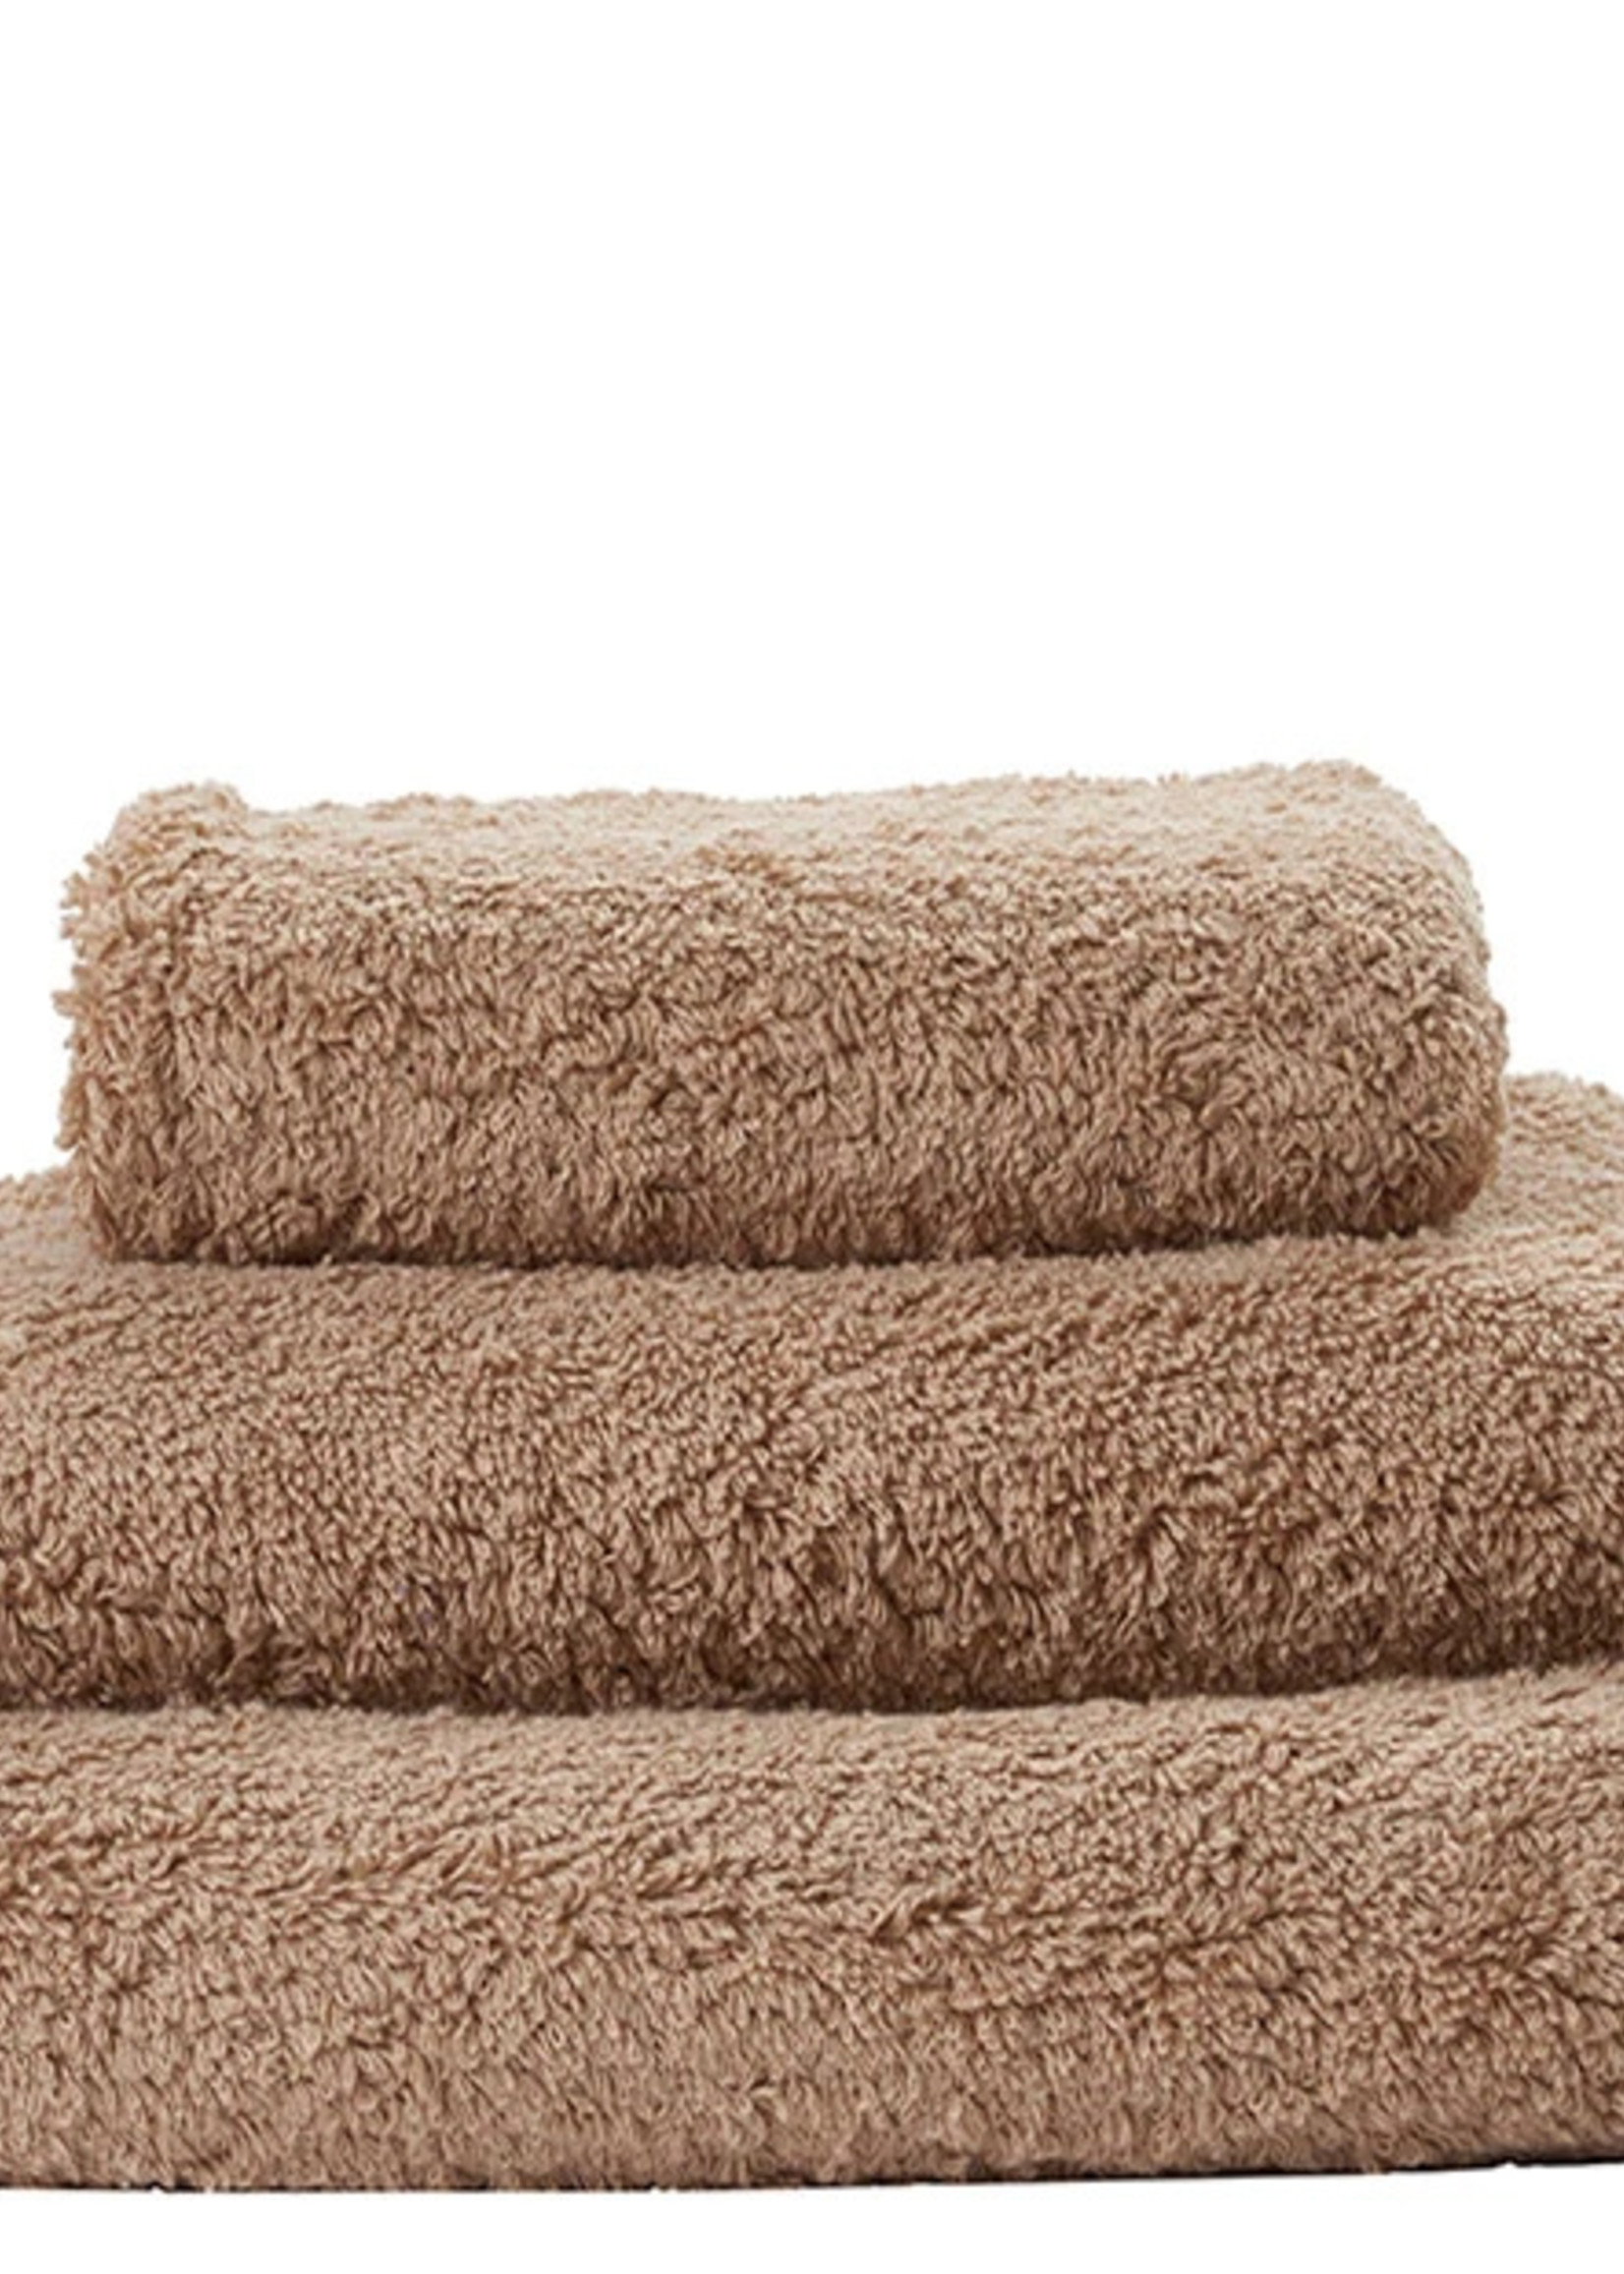 Abyss & Habidecor Super Pile Taupe Towels